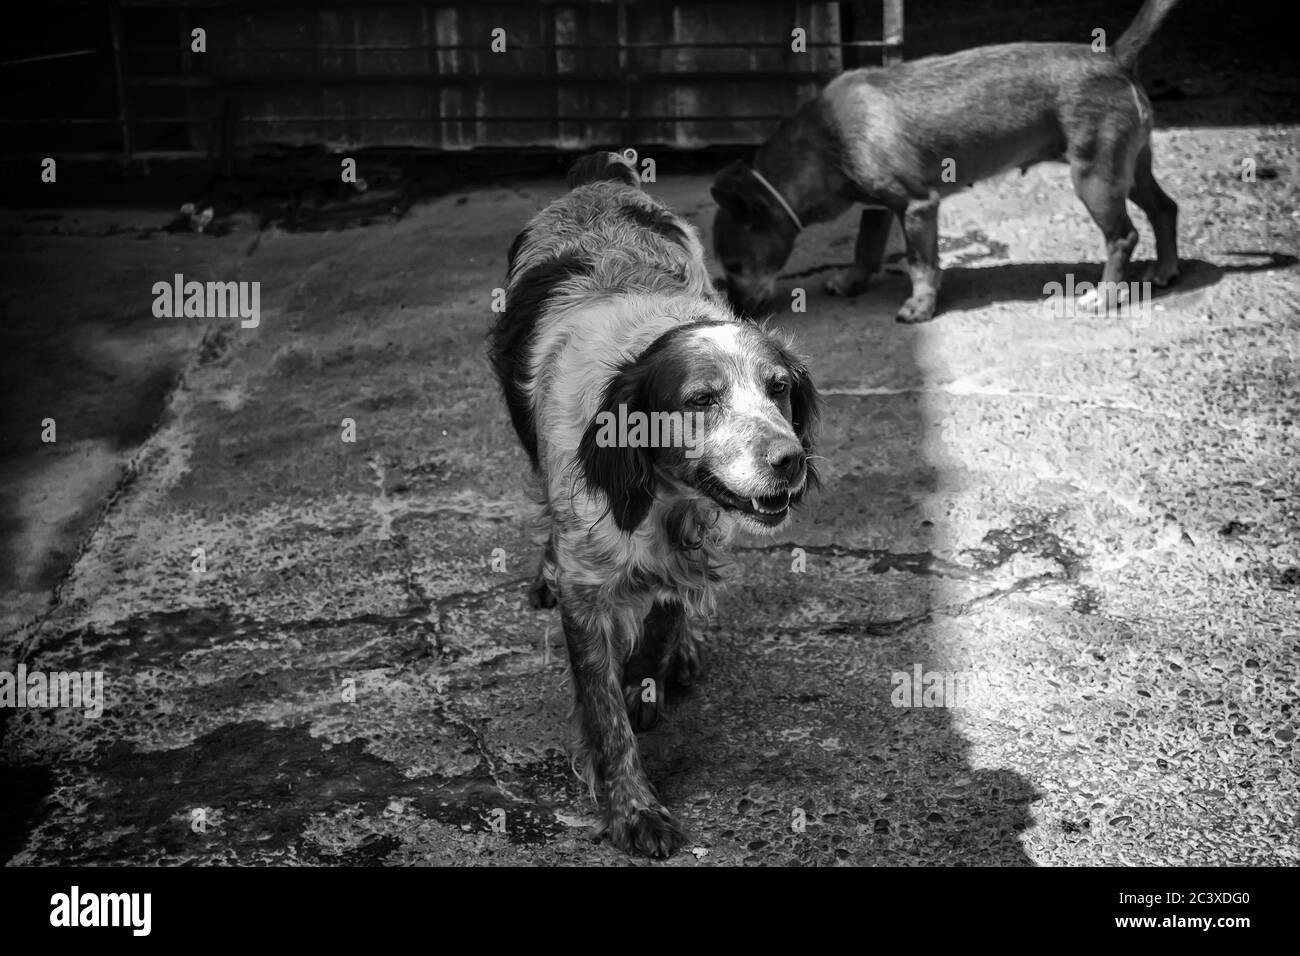 Hunting dog in den, animals and nature, sport Stock Photo